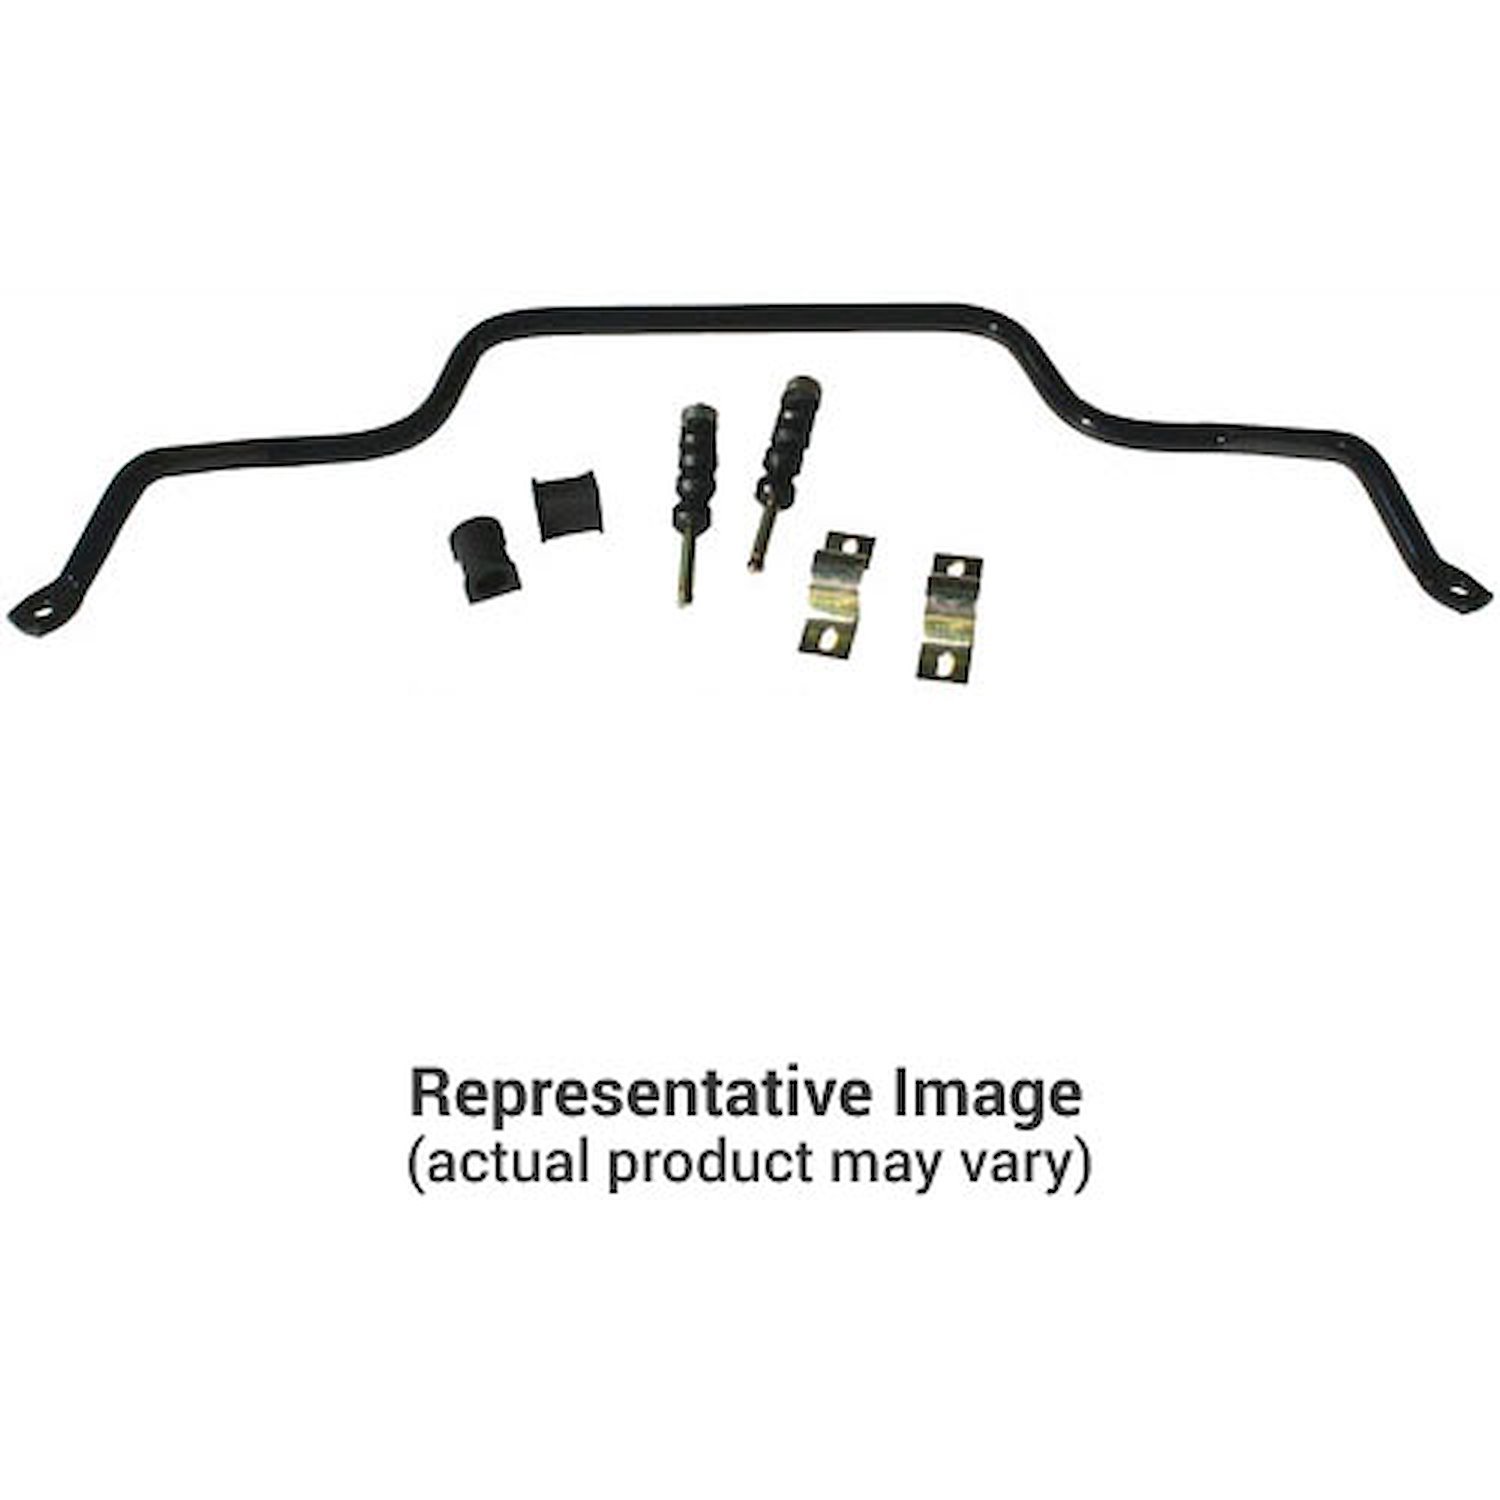 1" Front Sway Bar 1992-96 Prelude